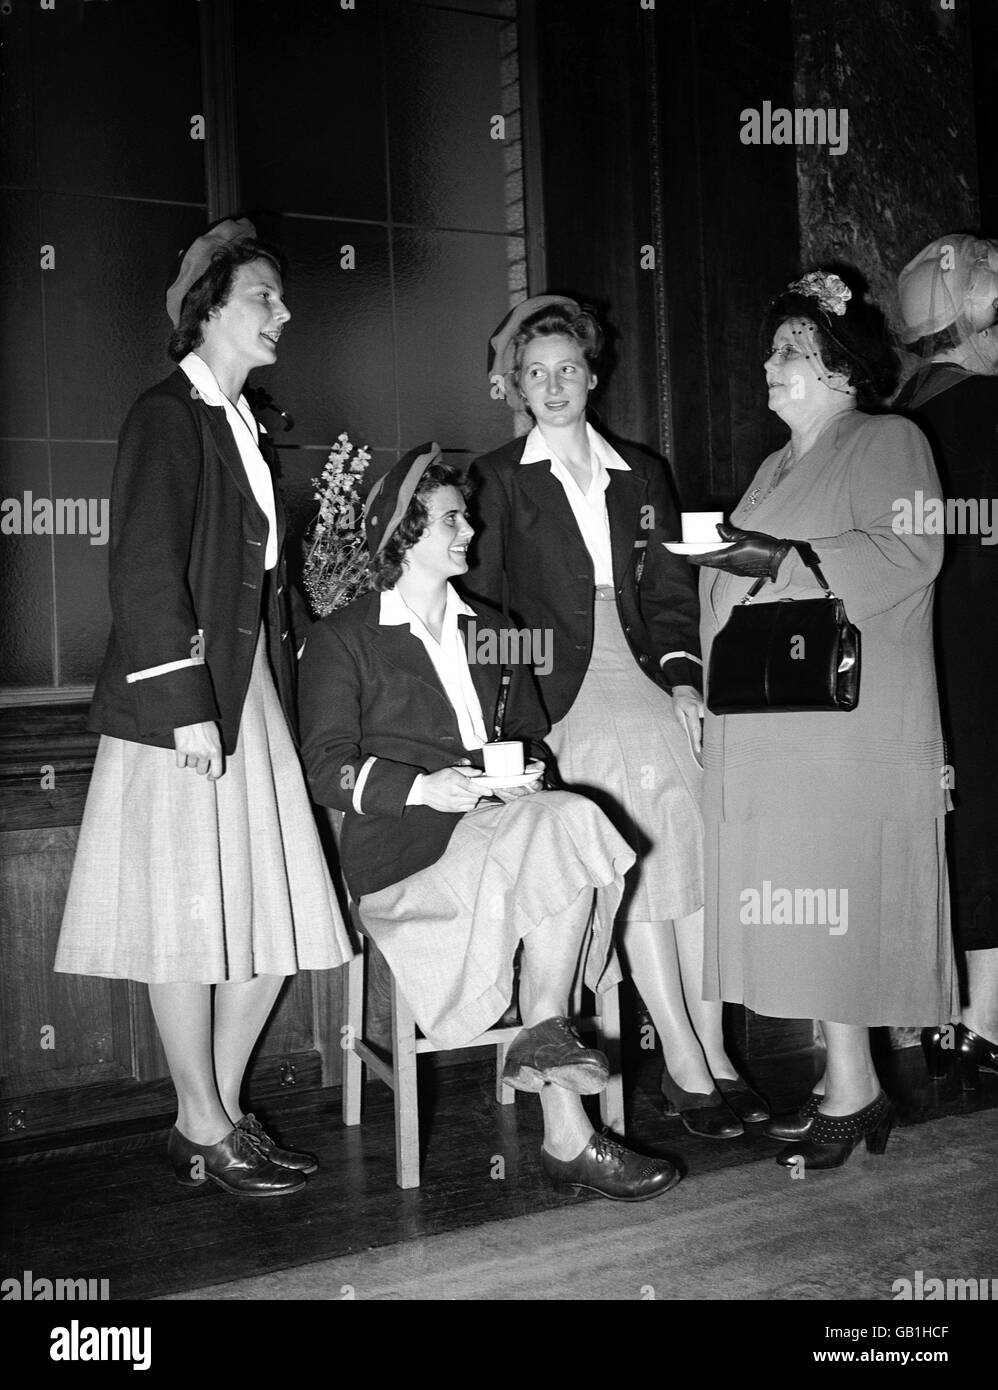 Mrs JA Beasley (r), the Australian High Commissioner's wife, talks to Australian athletes (l-r) Judy Canty, June Mason and Shirley Strickland. Stock Photo